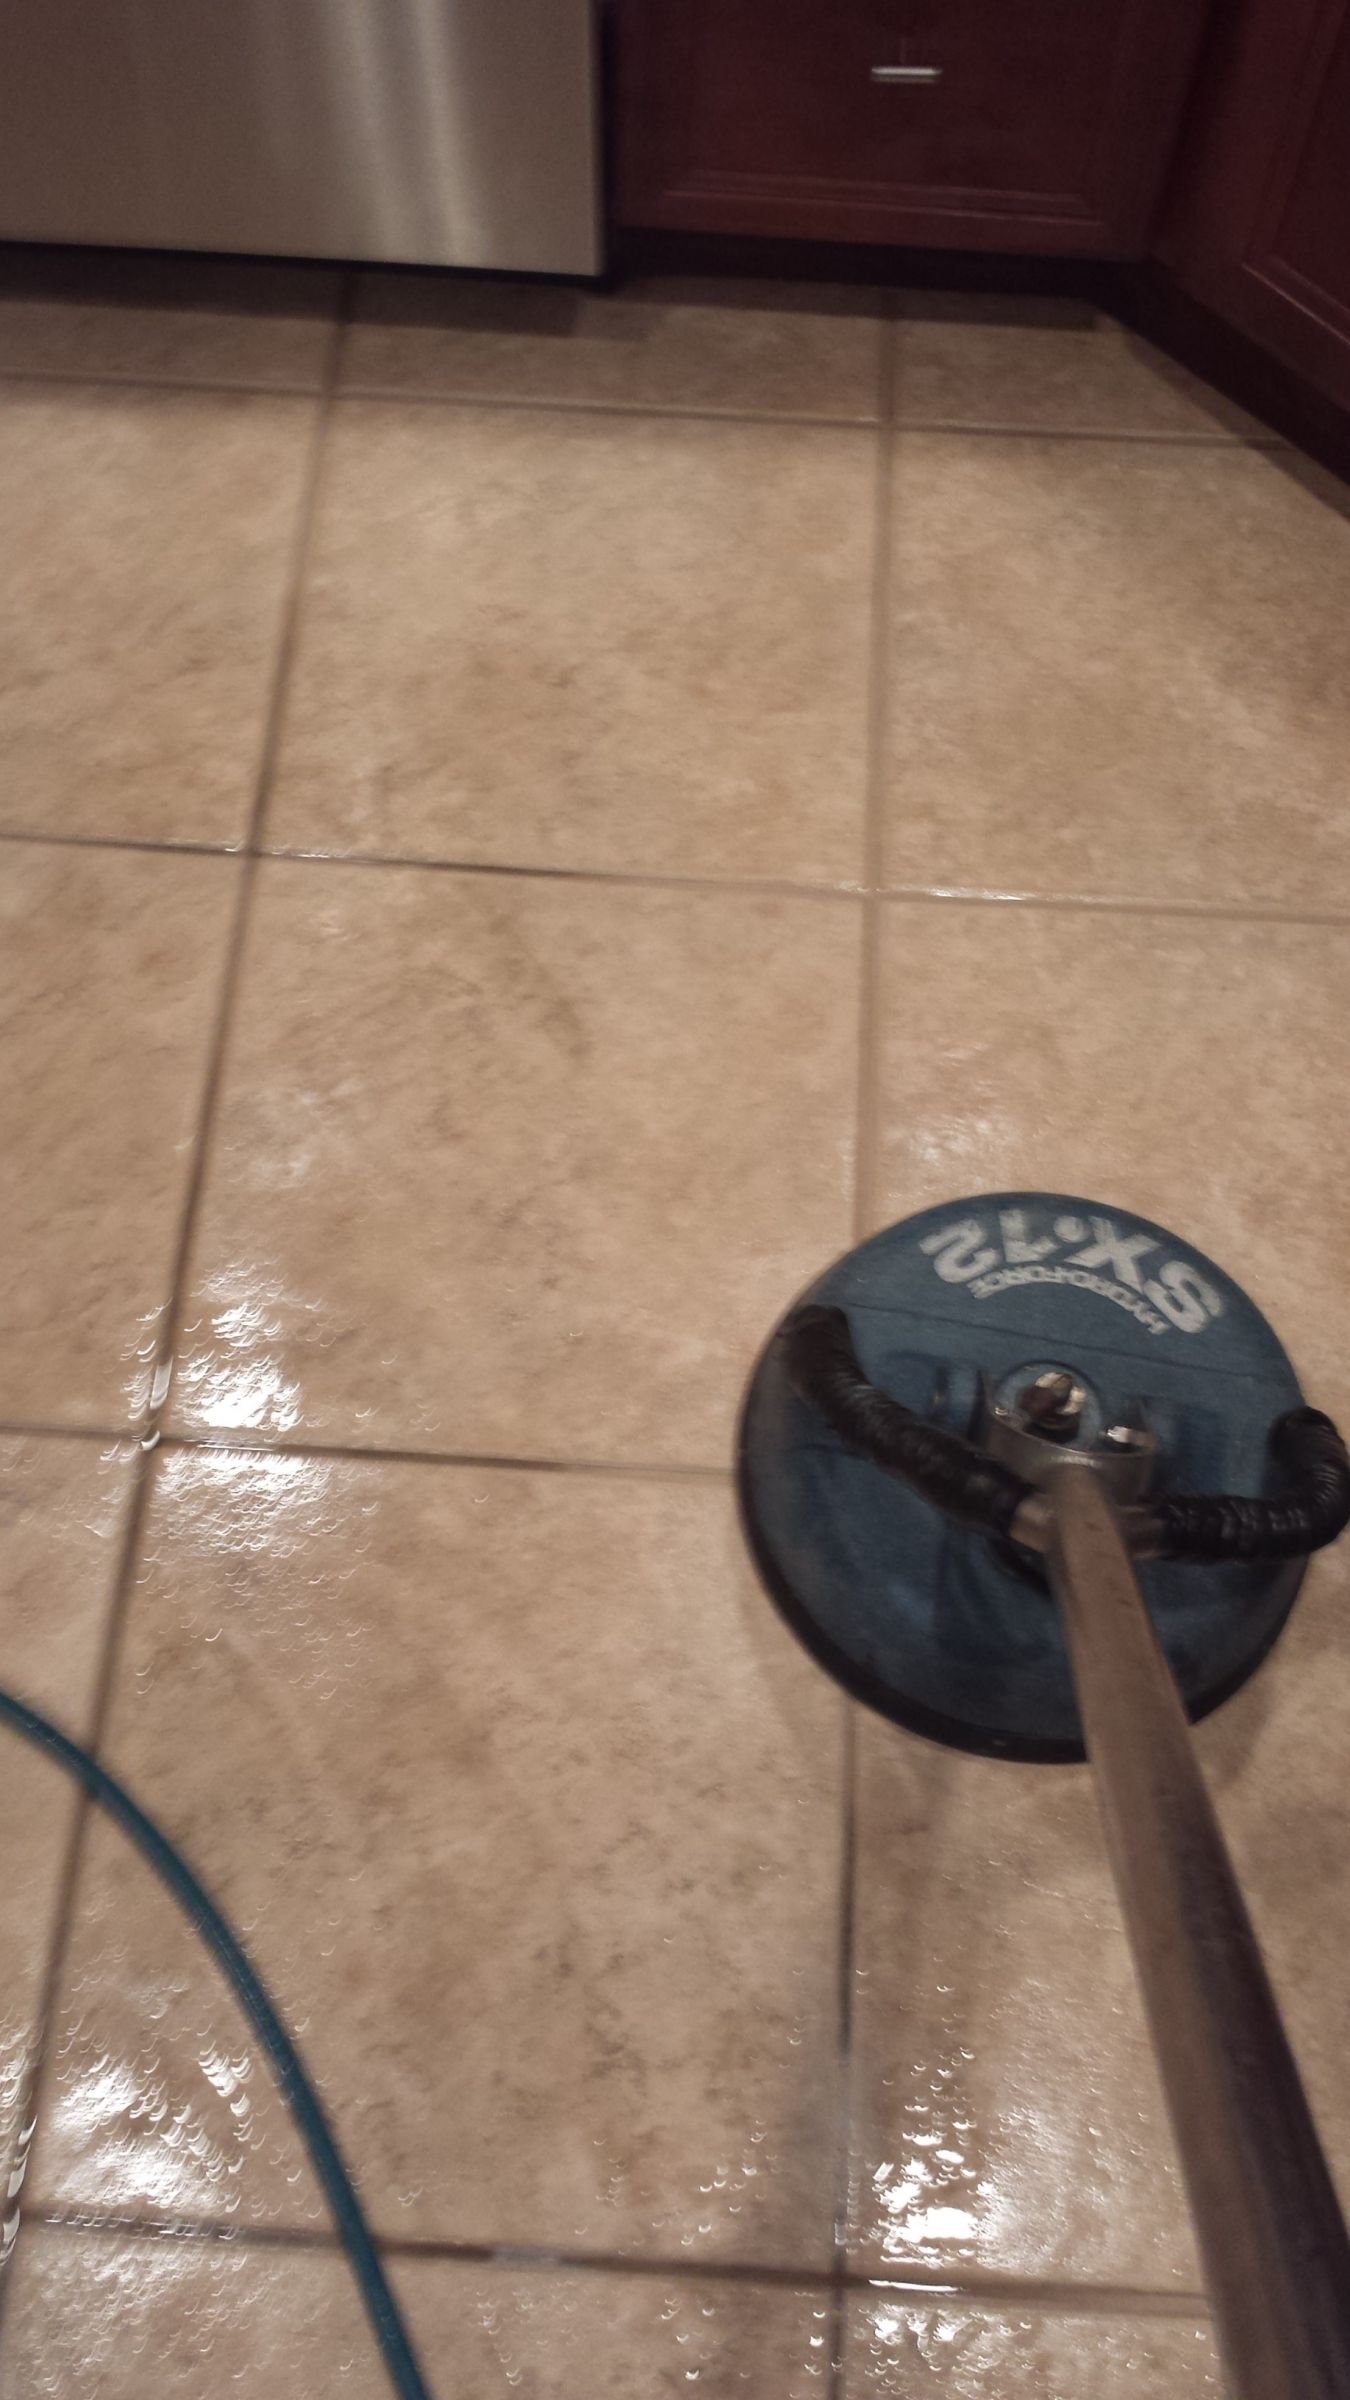 Professional Tile and Grout Cleaning from Majestic in Moorestown, NJ